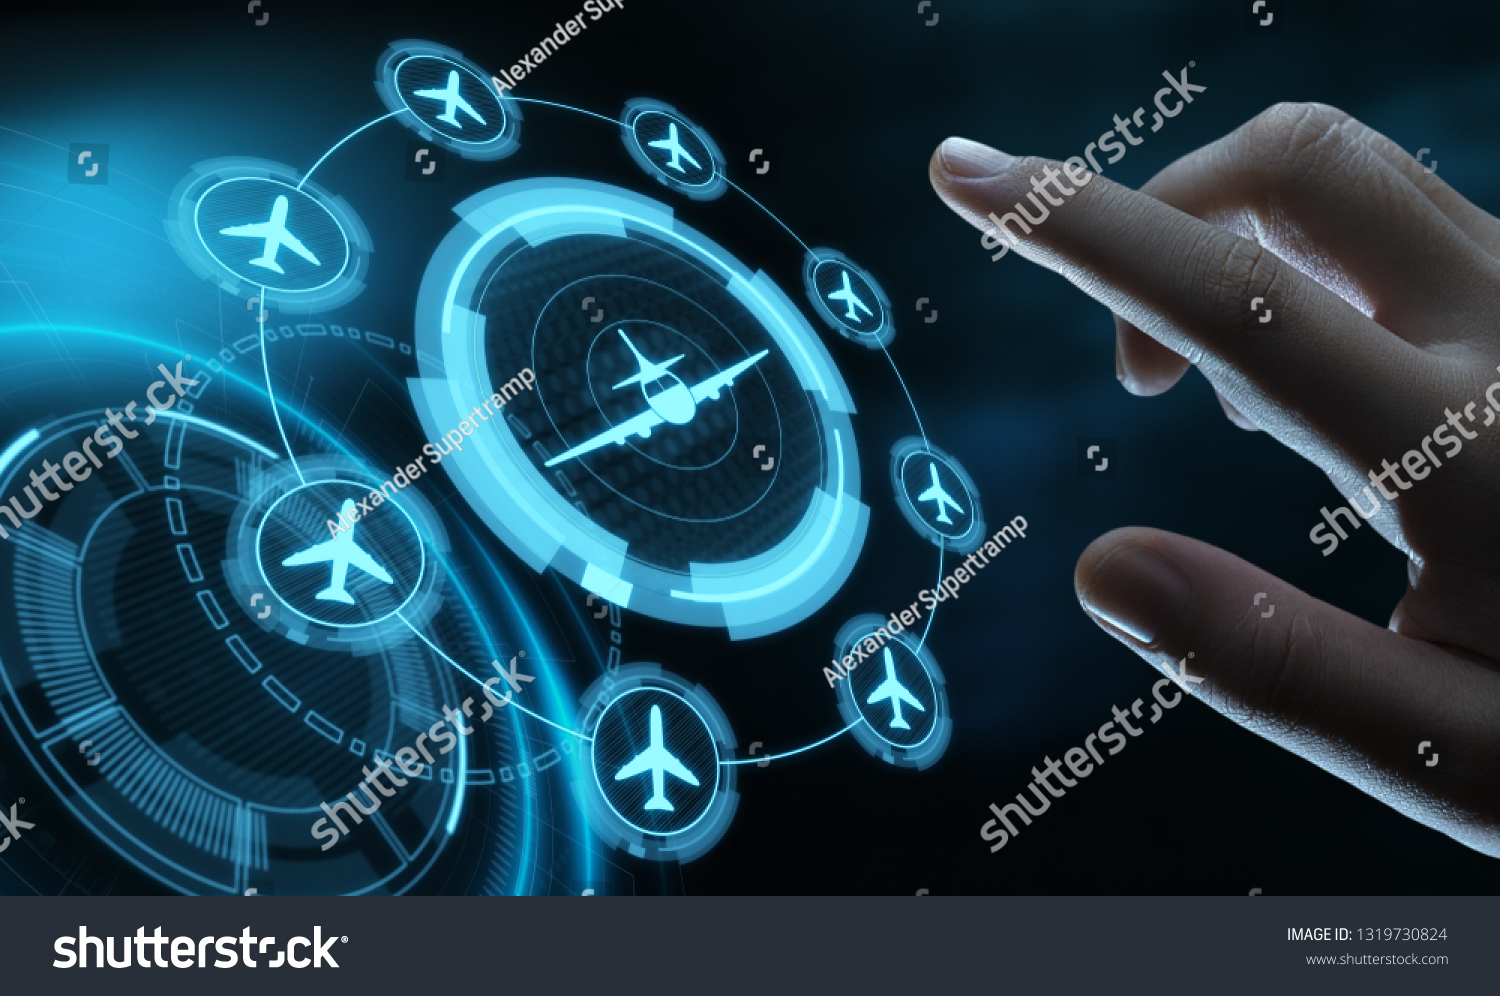 Business Technology Travel Transportation concept with planes. #1319730824